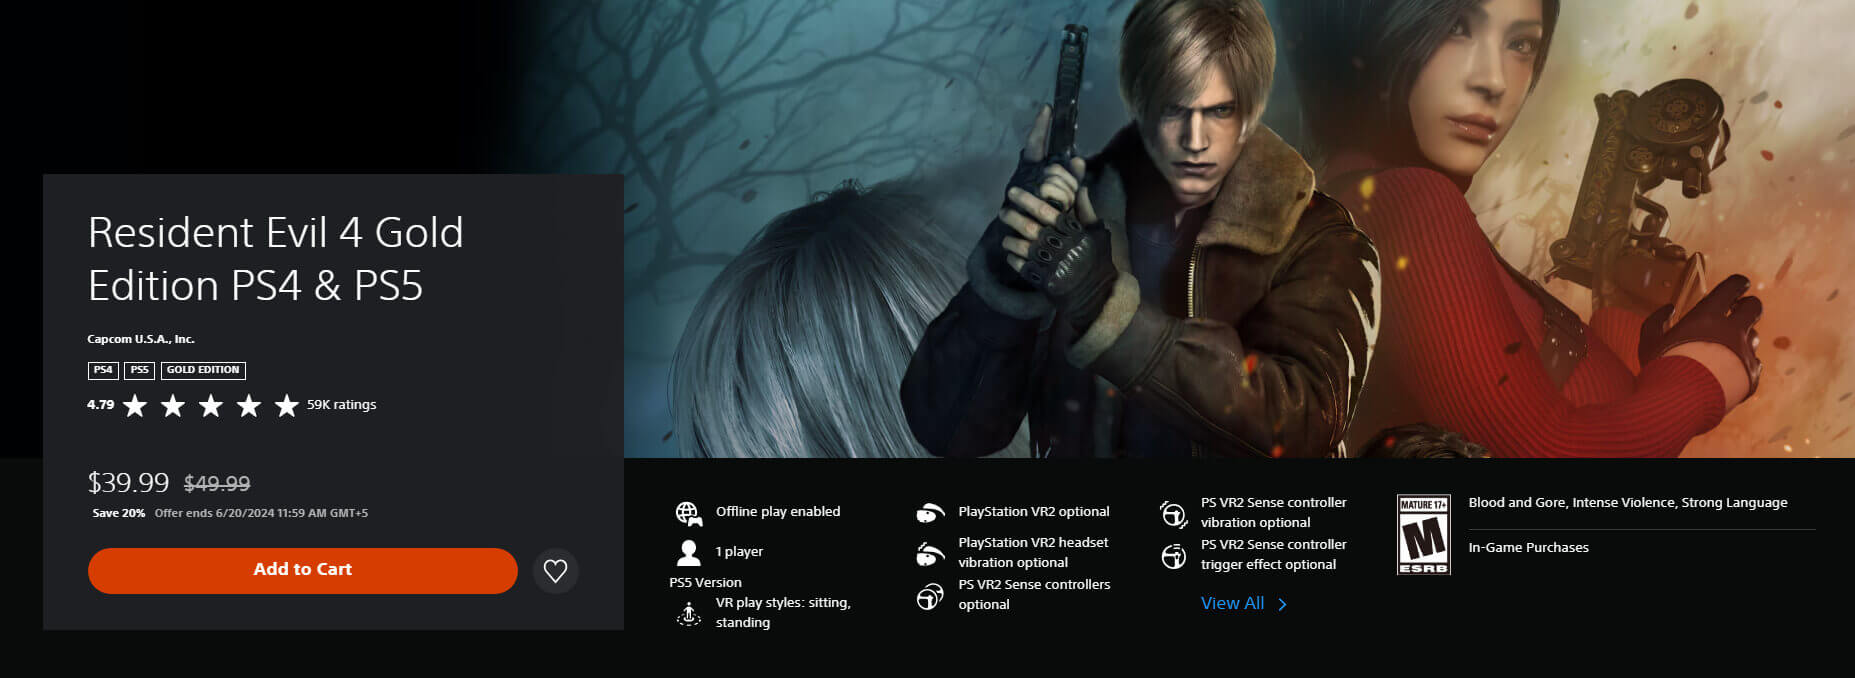 Resident Evil 4 Gold Edition on the PS Store